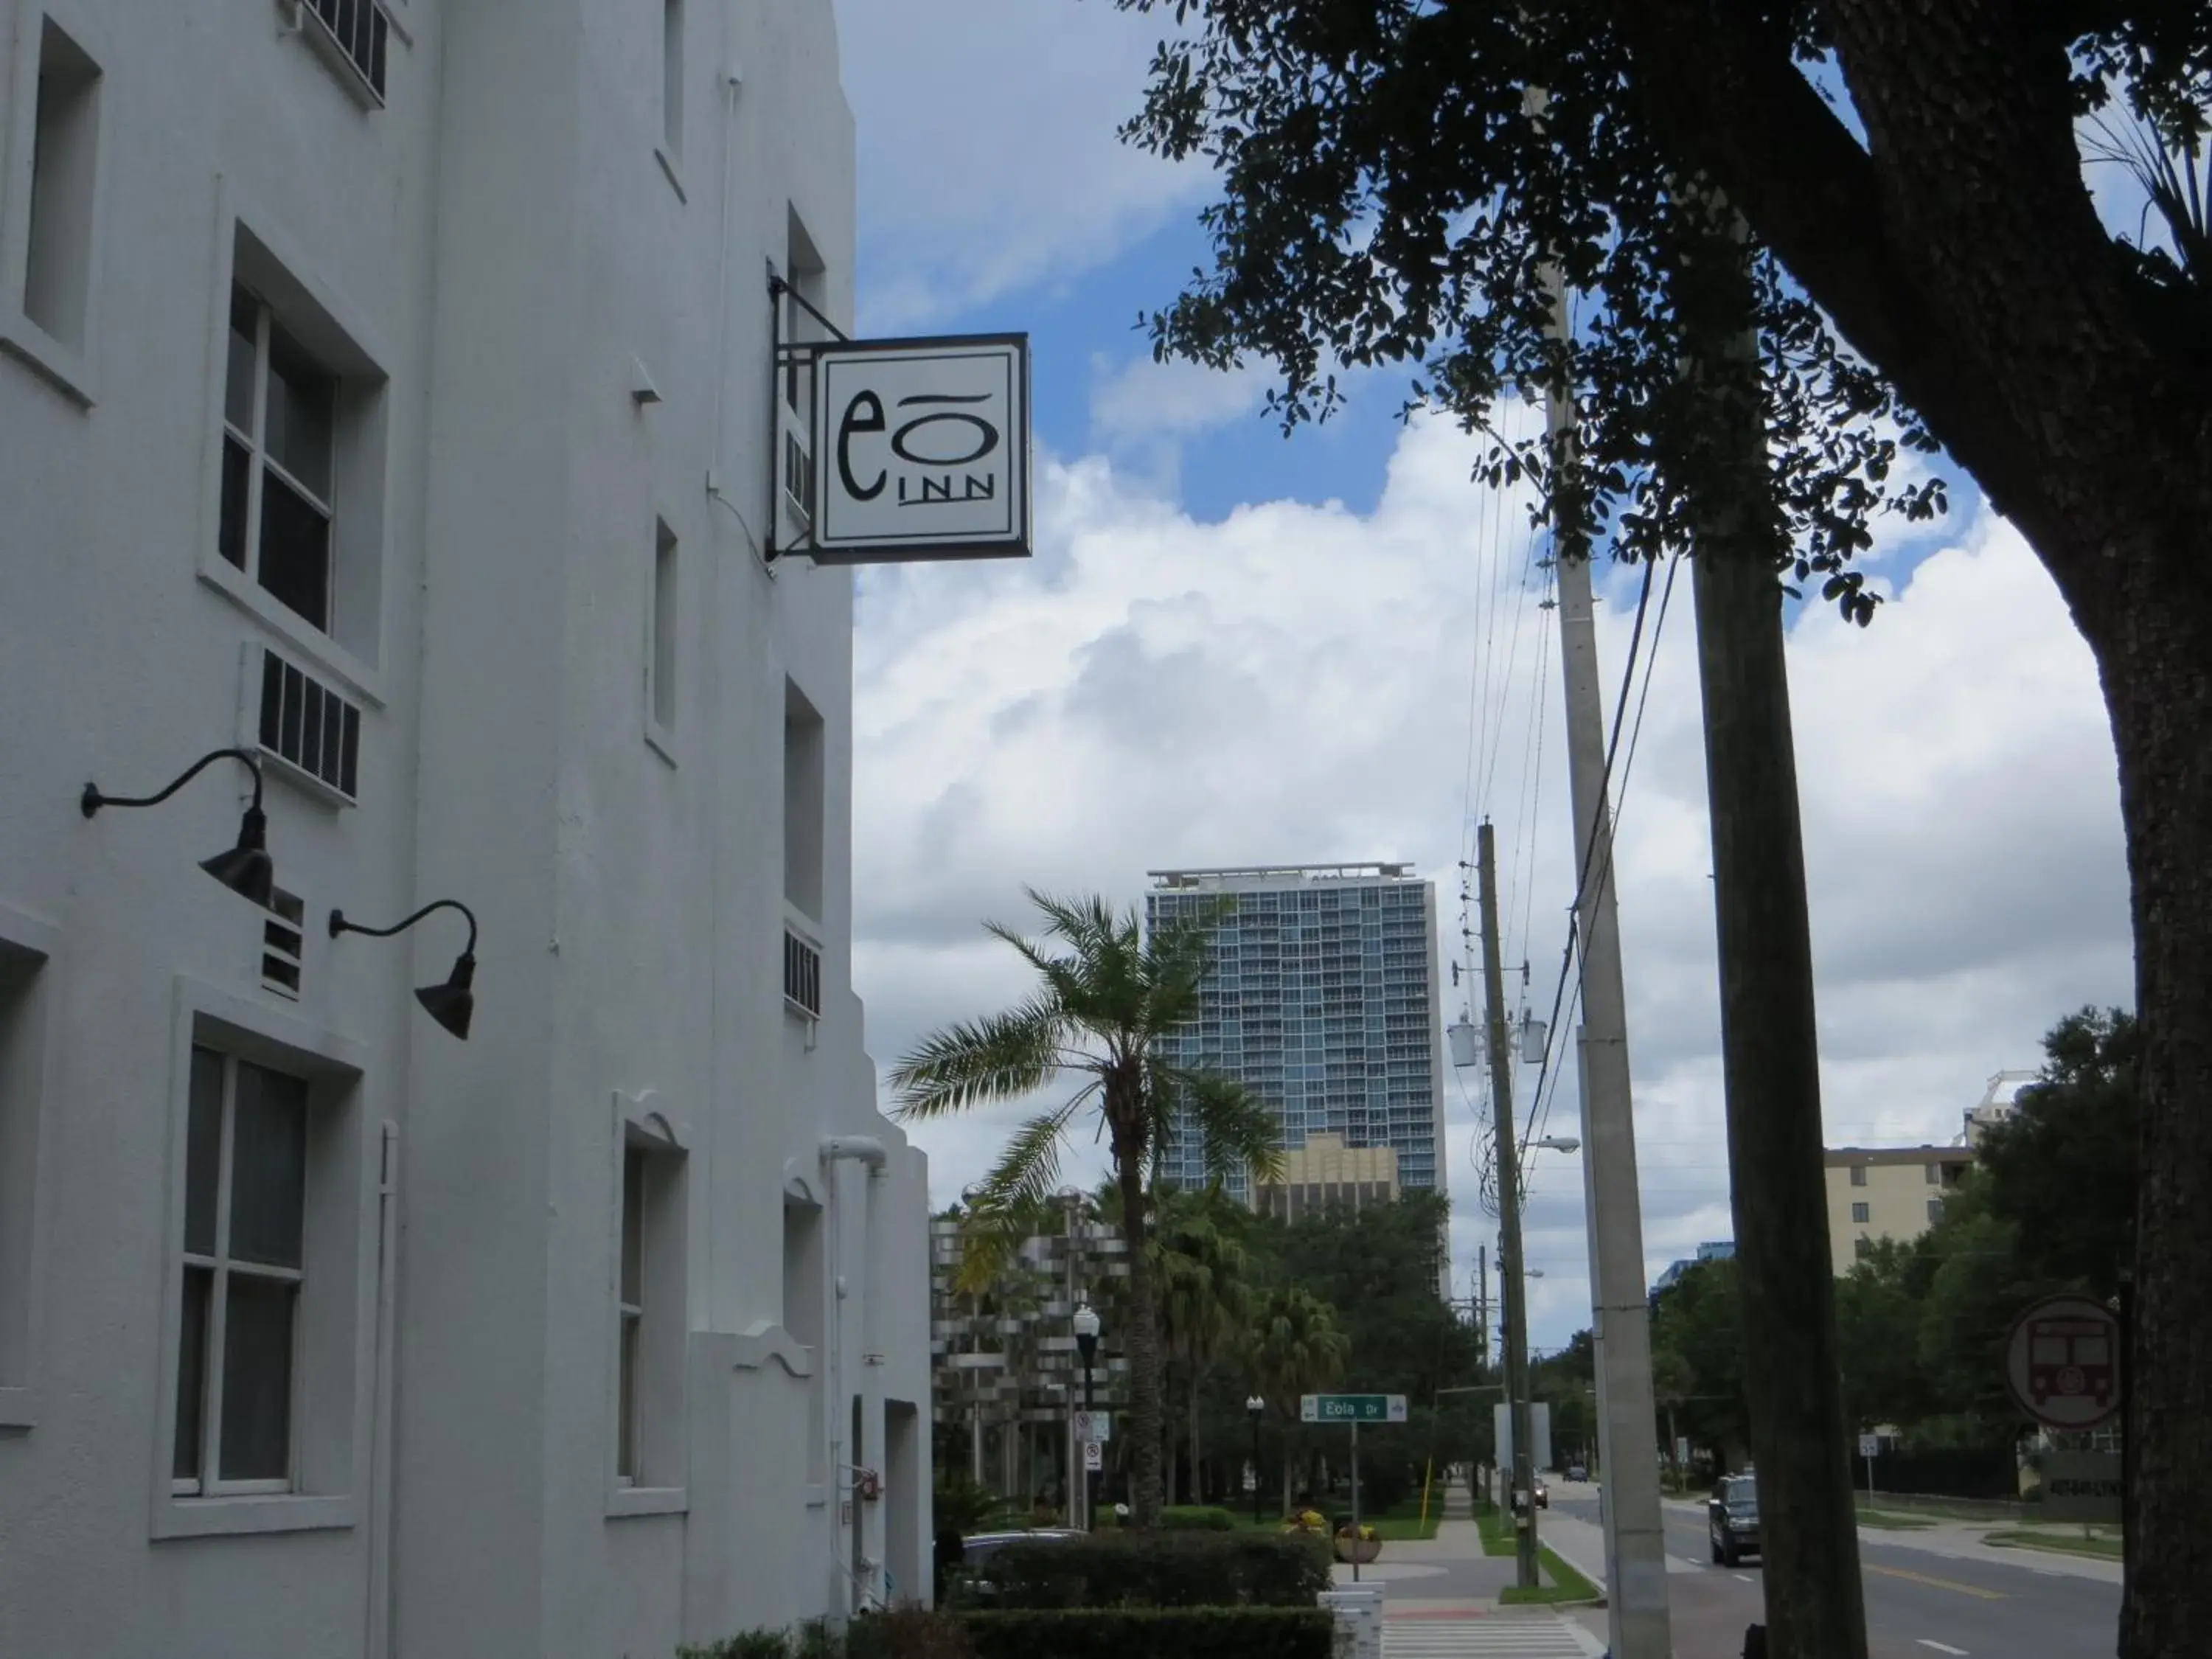 Property Building in Eo Inn - Downtown Orlando